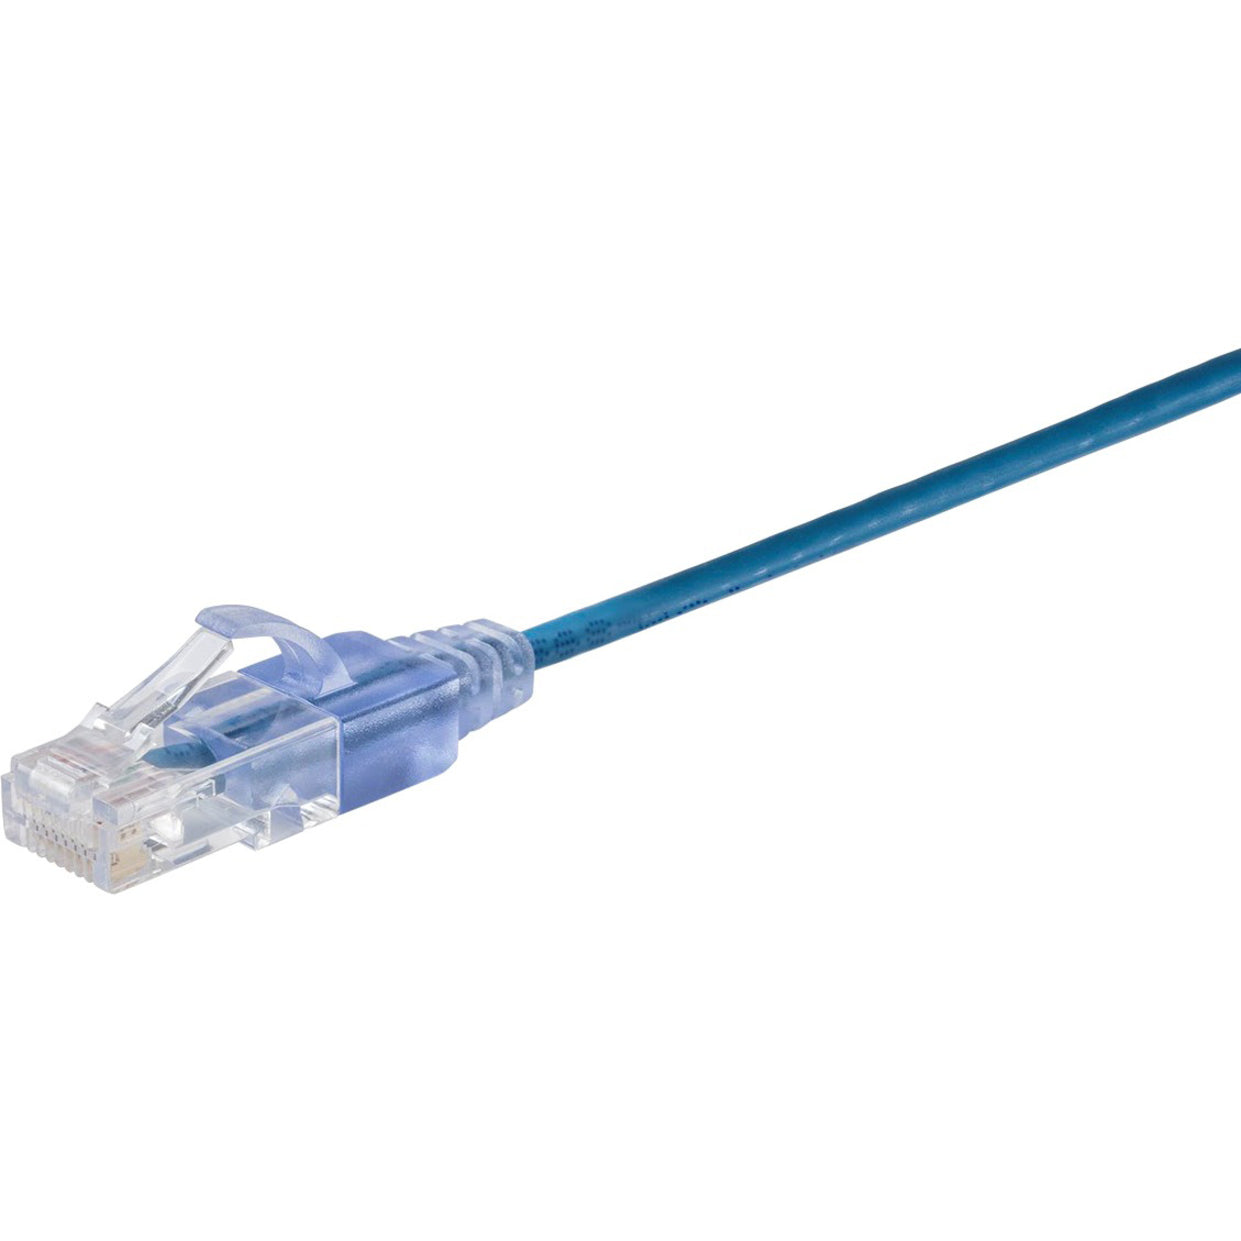 Monoprice 15170 SlimRun Cat6A Ethernet Network Patch Cable 14ft Blue, 10-Pack